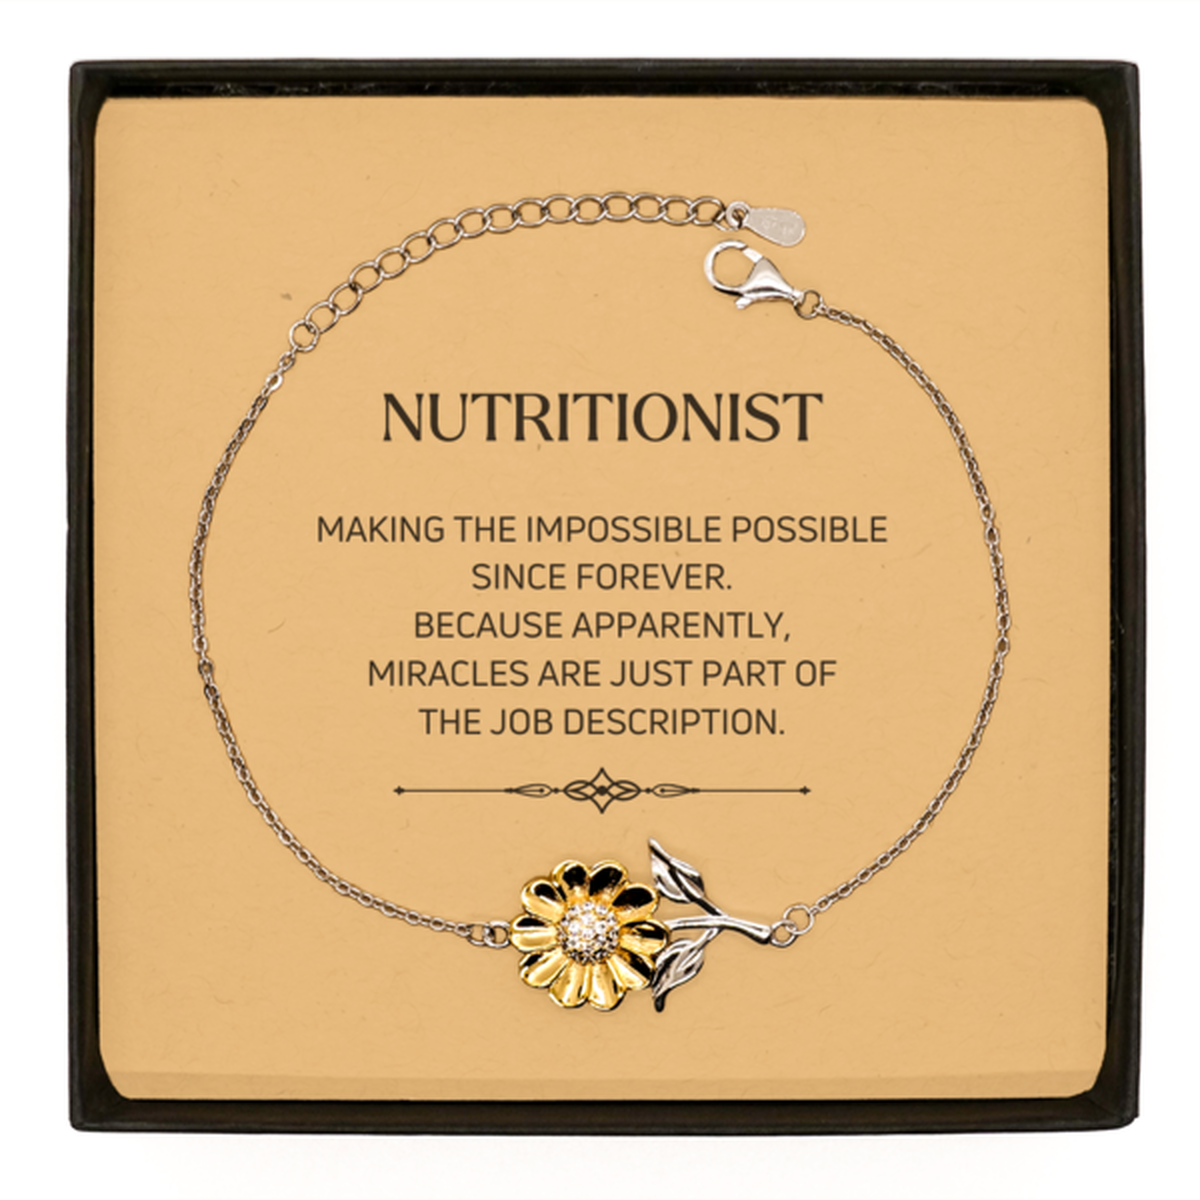 Funny Nutritionist Gifts, Miracles are just part of the job description, Inspirational Birthday Sunflower Bracelet For Nutritionist, Men, Women, Coworkers, Friends, Boss